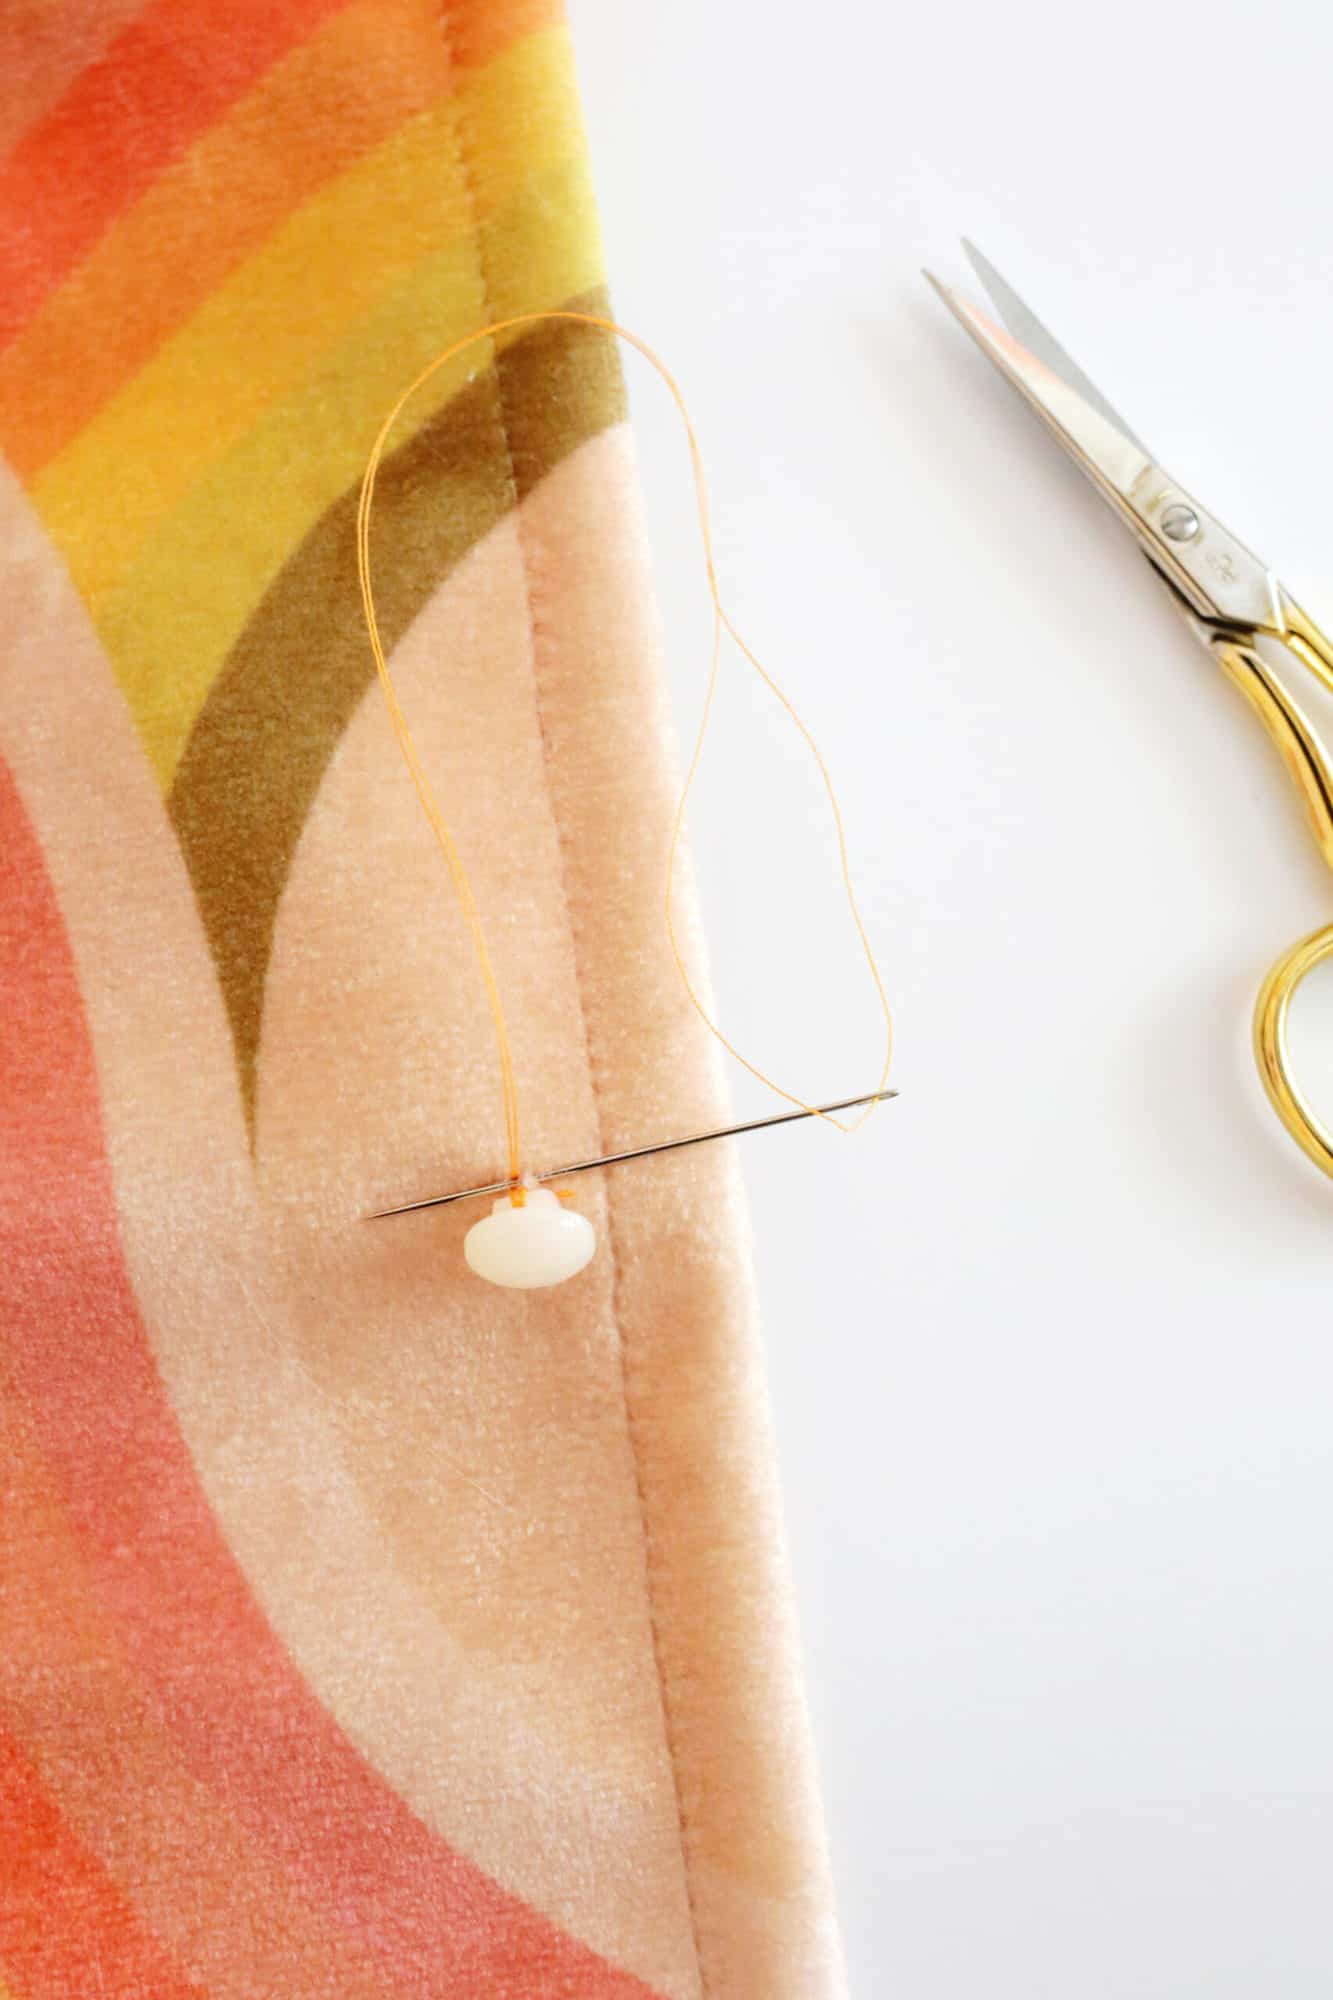 passing threaded needle through a little bit of fabric while sewing on a button